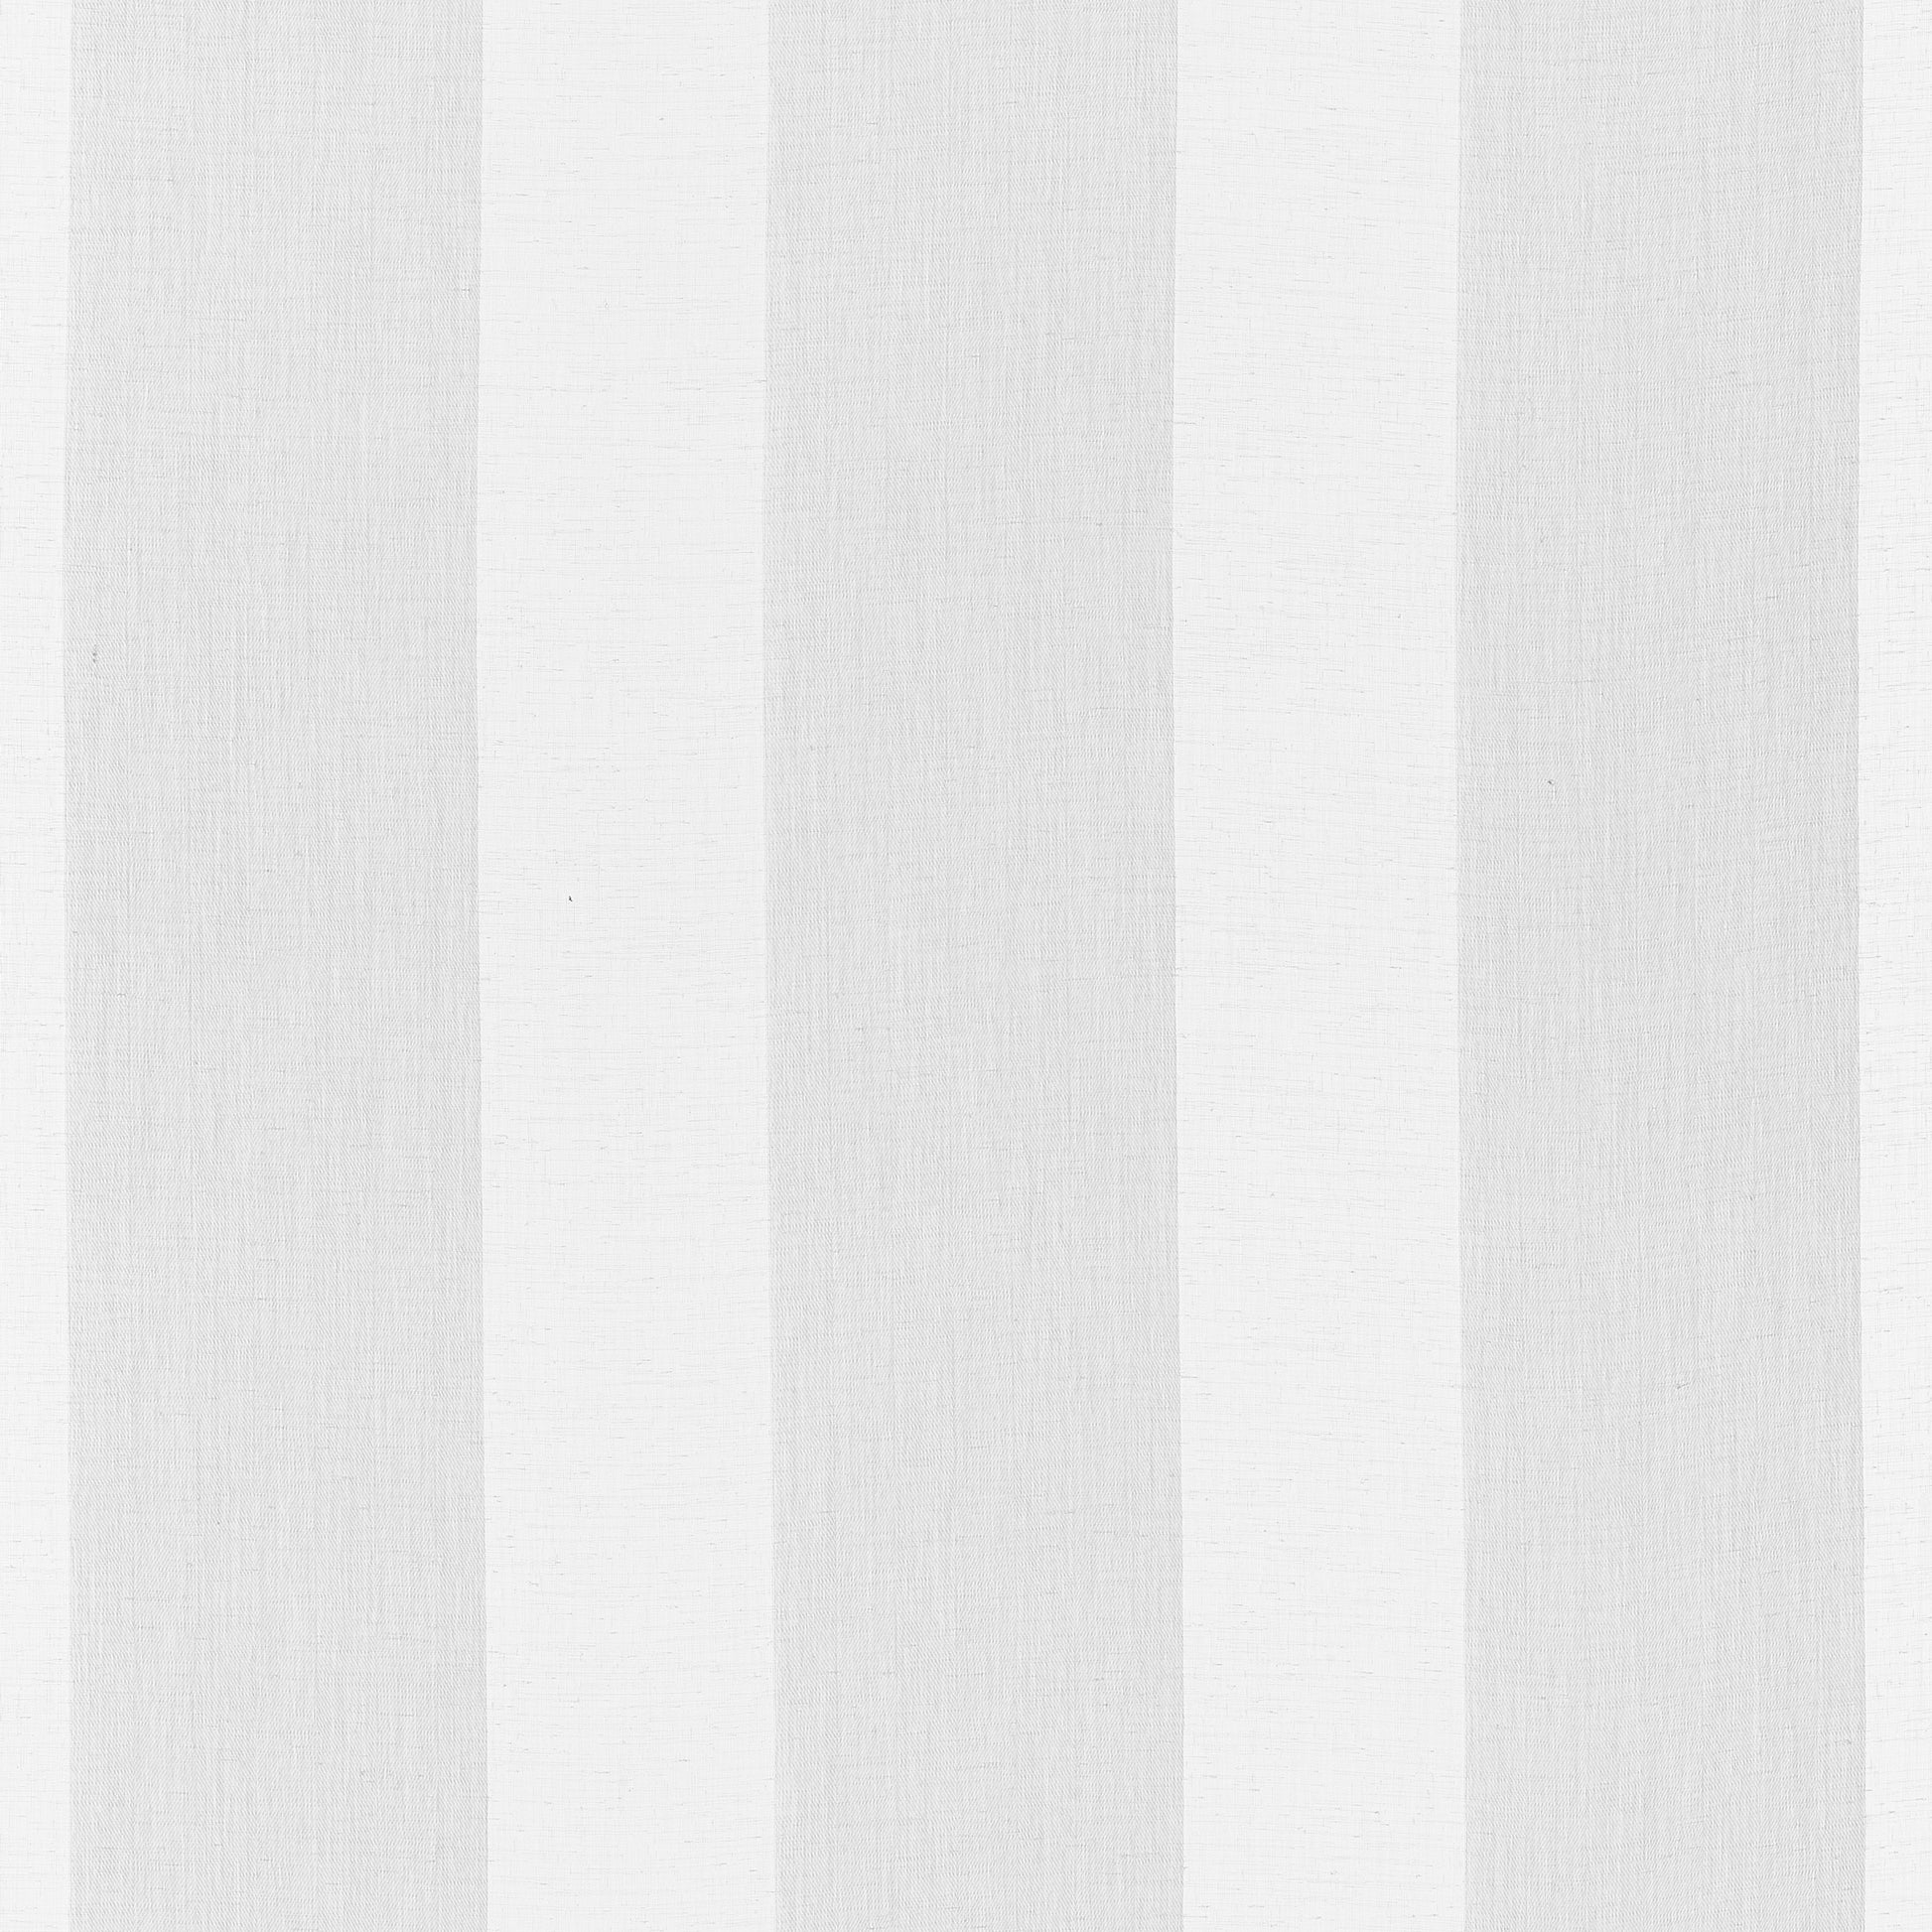 Purchase Thibaut Fabric Item# FWW7132 pattern name Manchester Stripe color Snow White